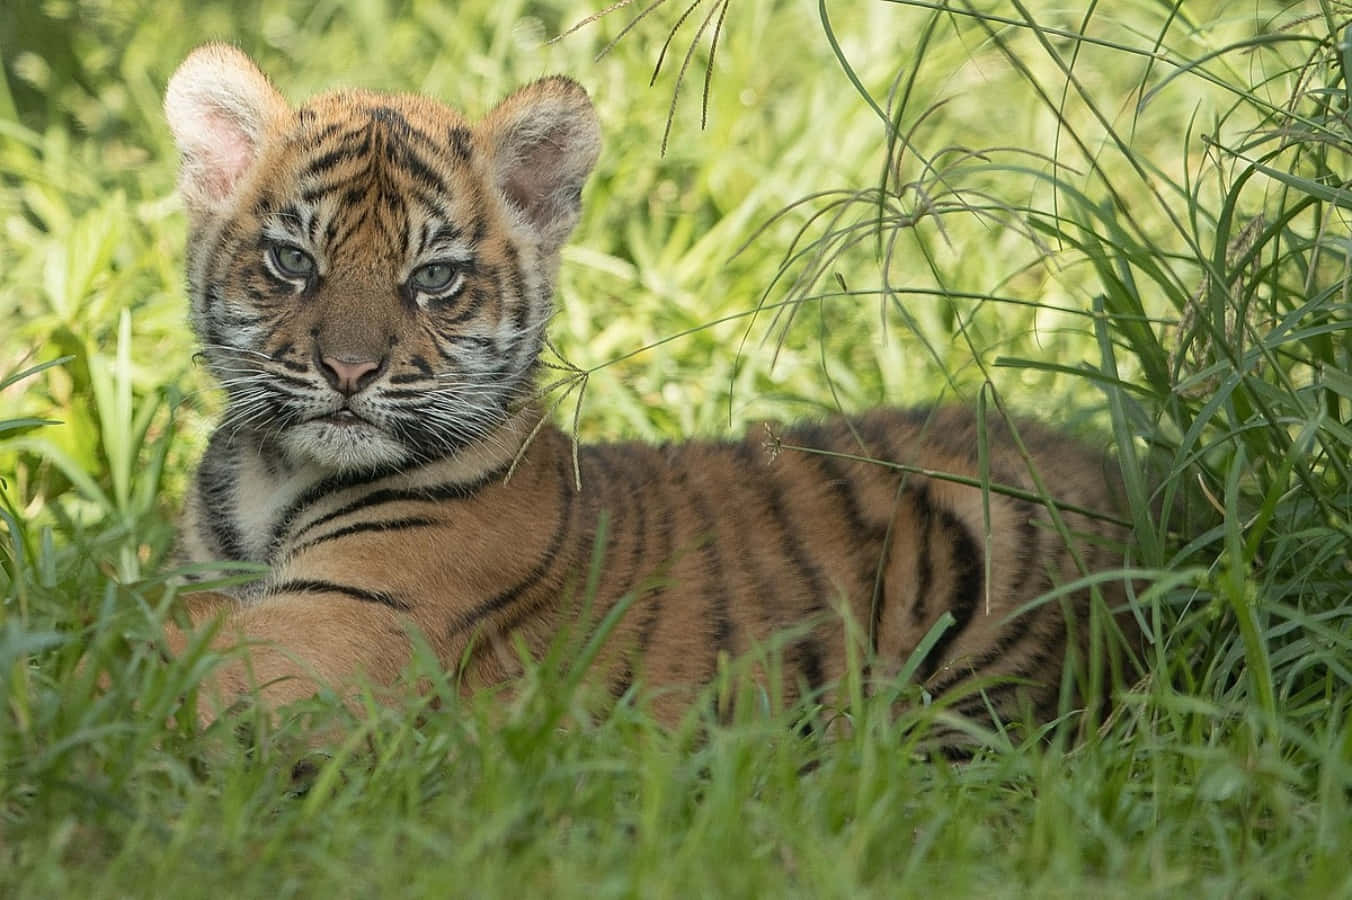 A Baby Tiger Gives an Adorable Look